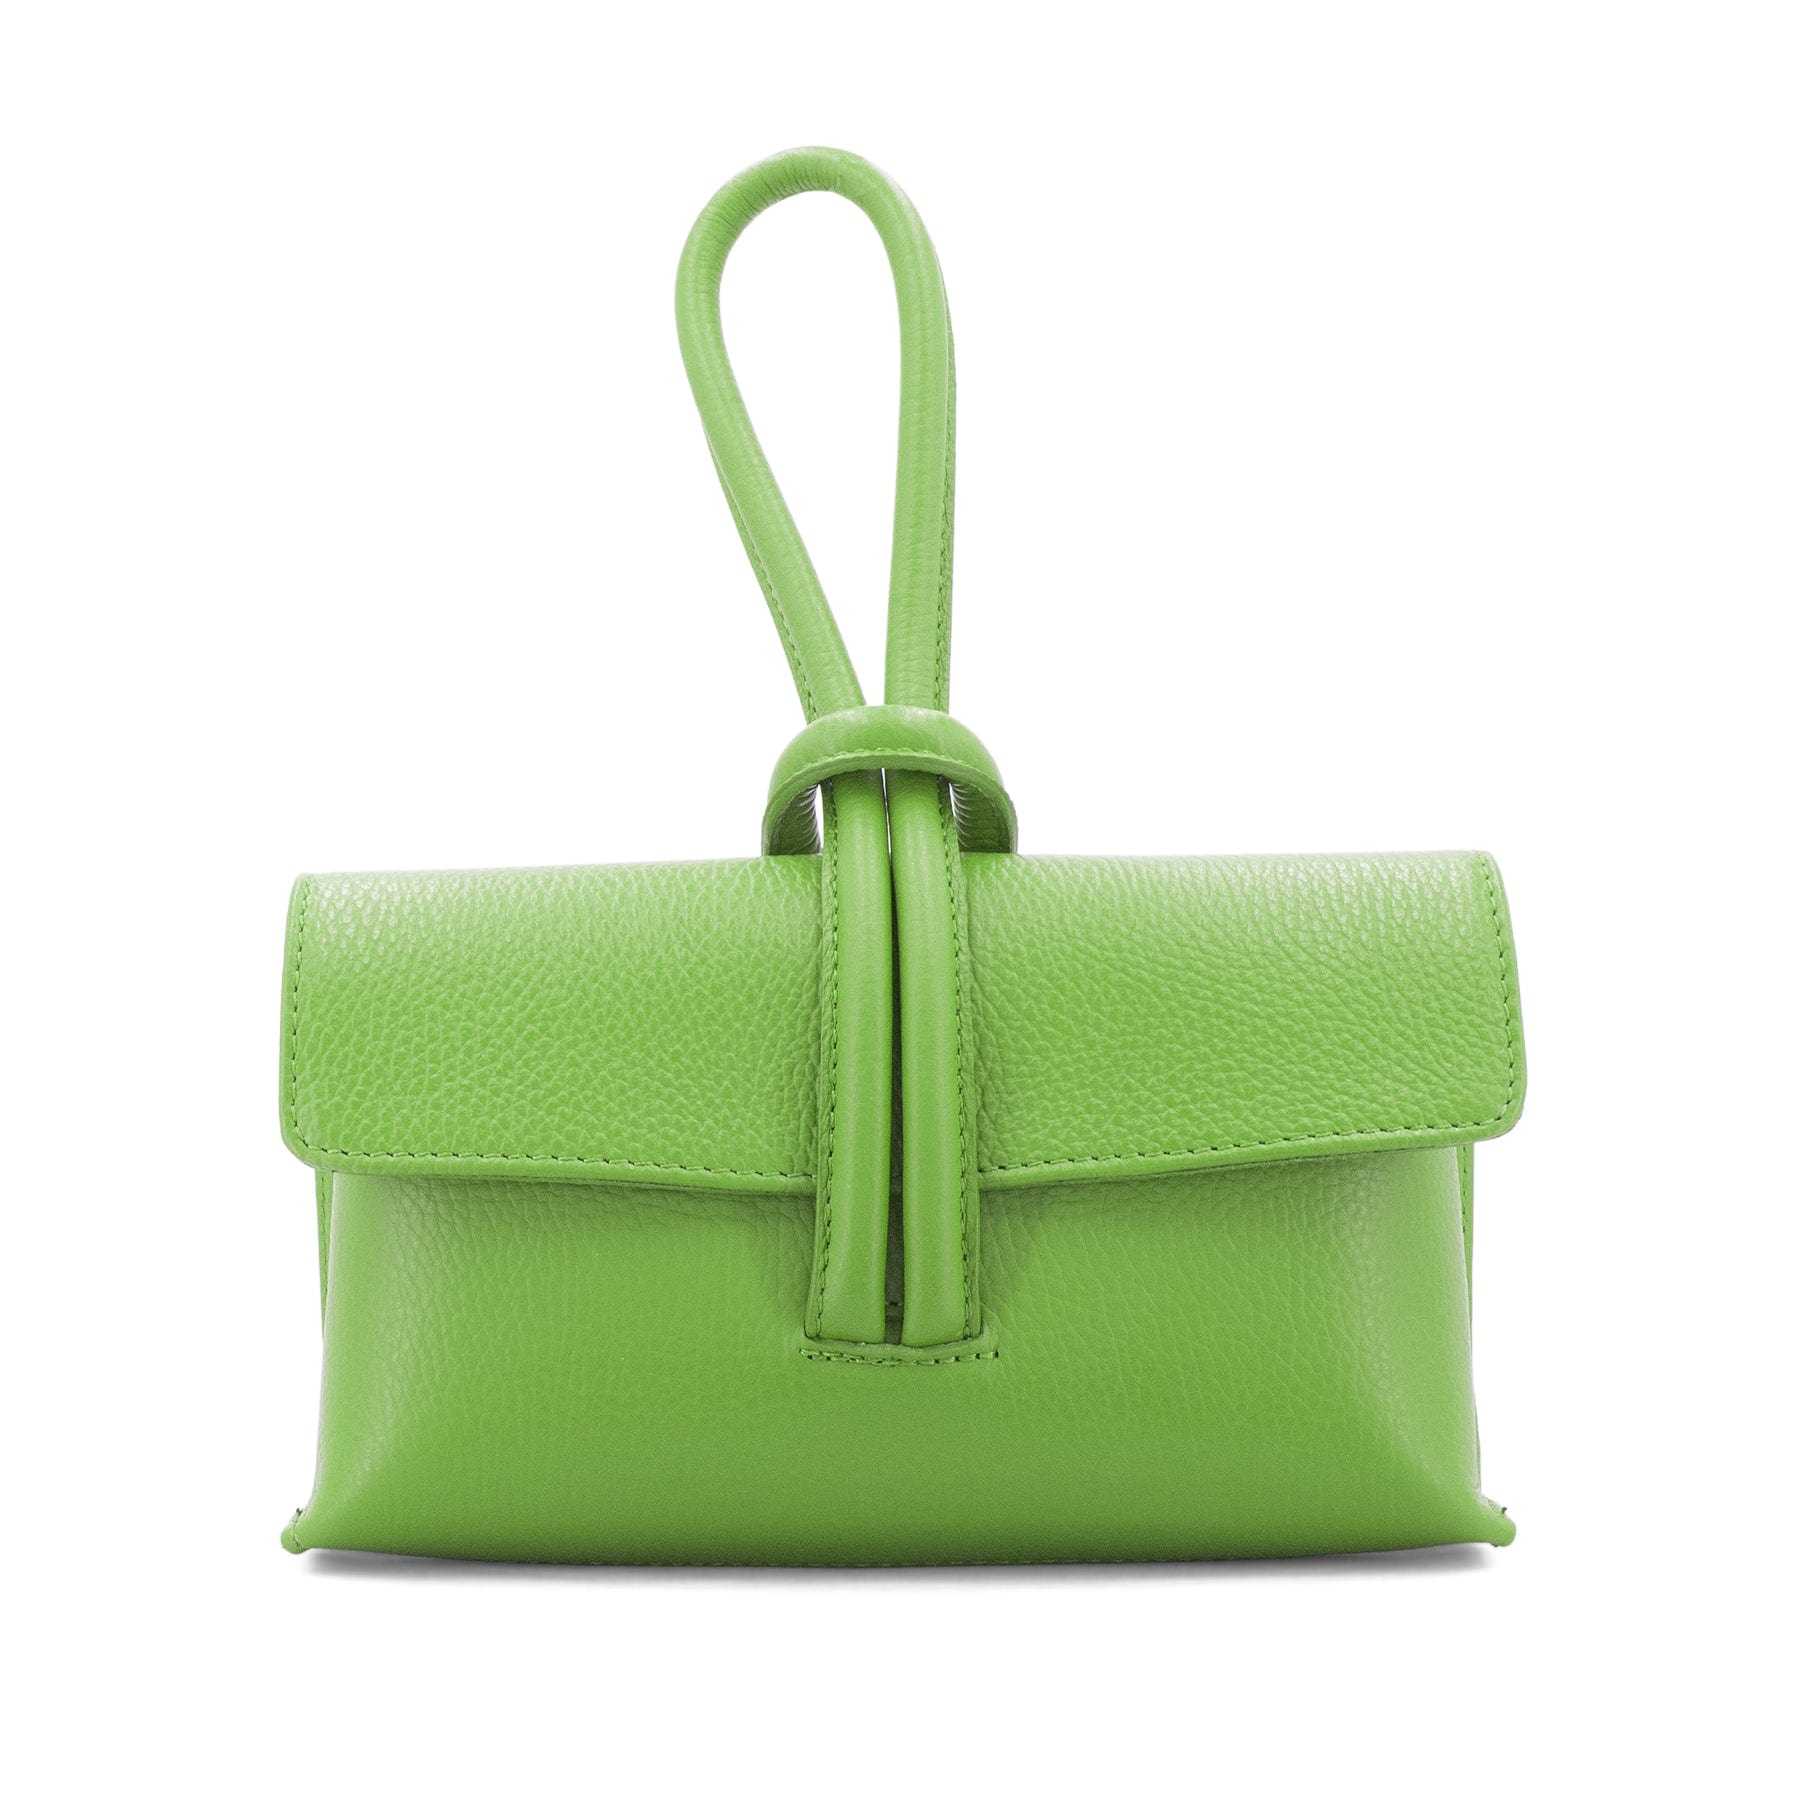 lusciousscarves Lime Green Italian Leather Clutch Bag, Evening Bag with a Loop Handle